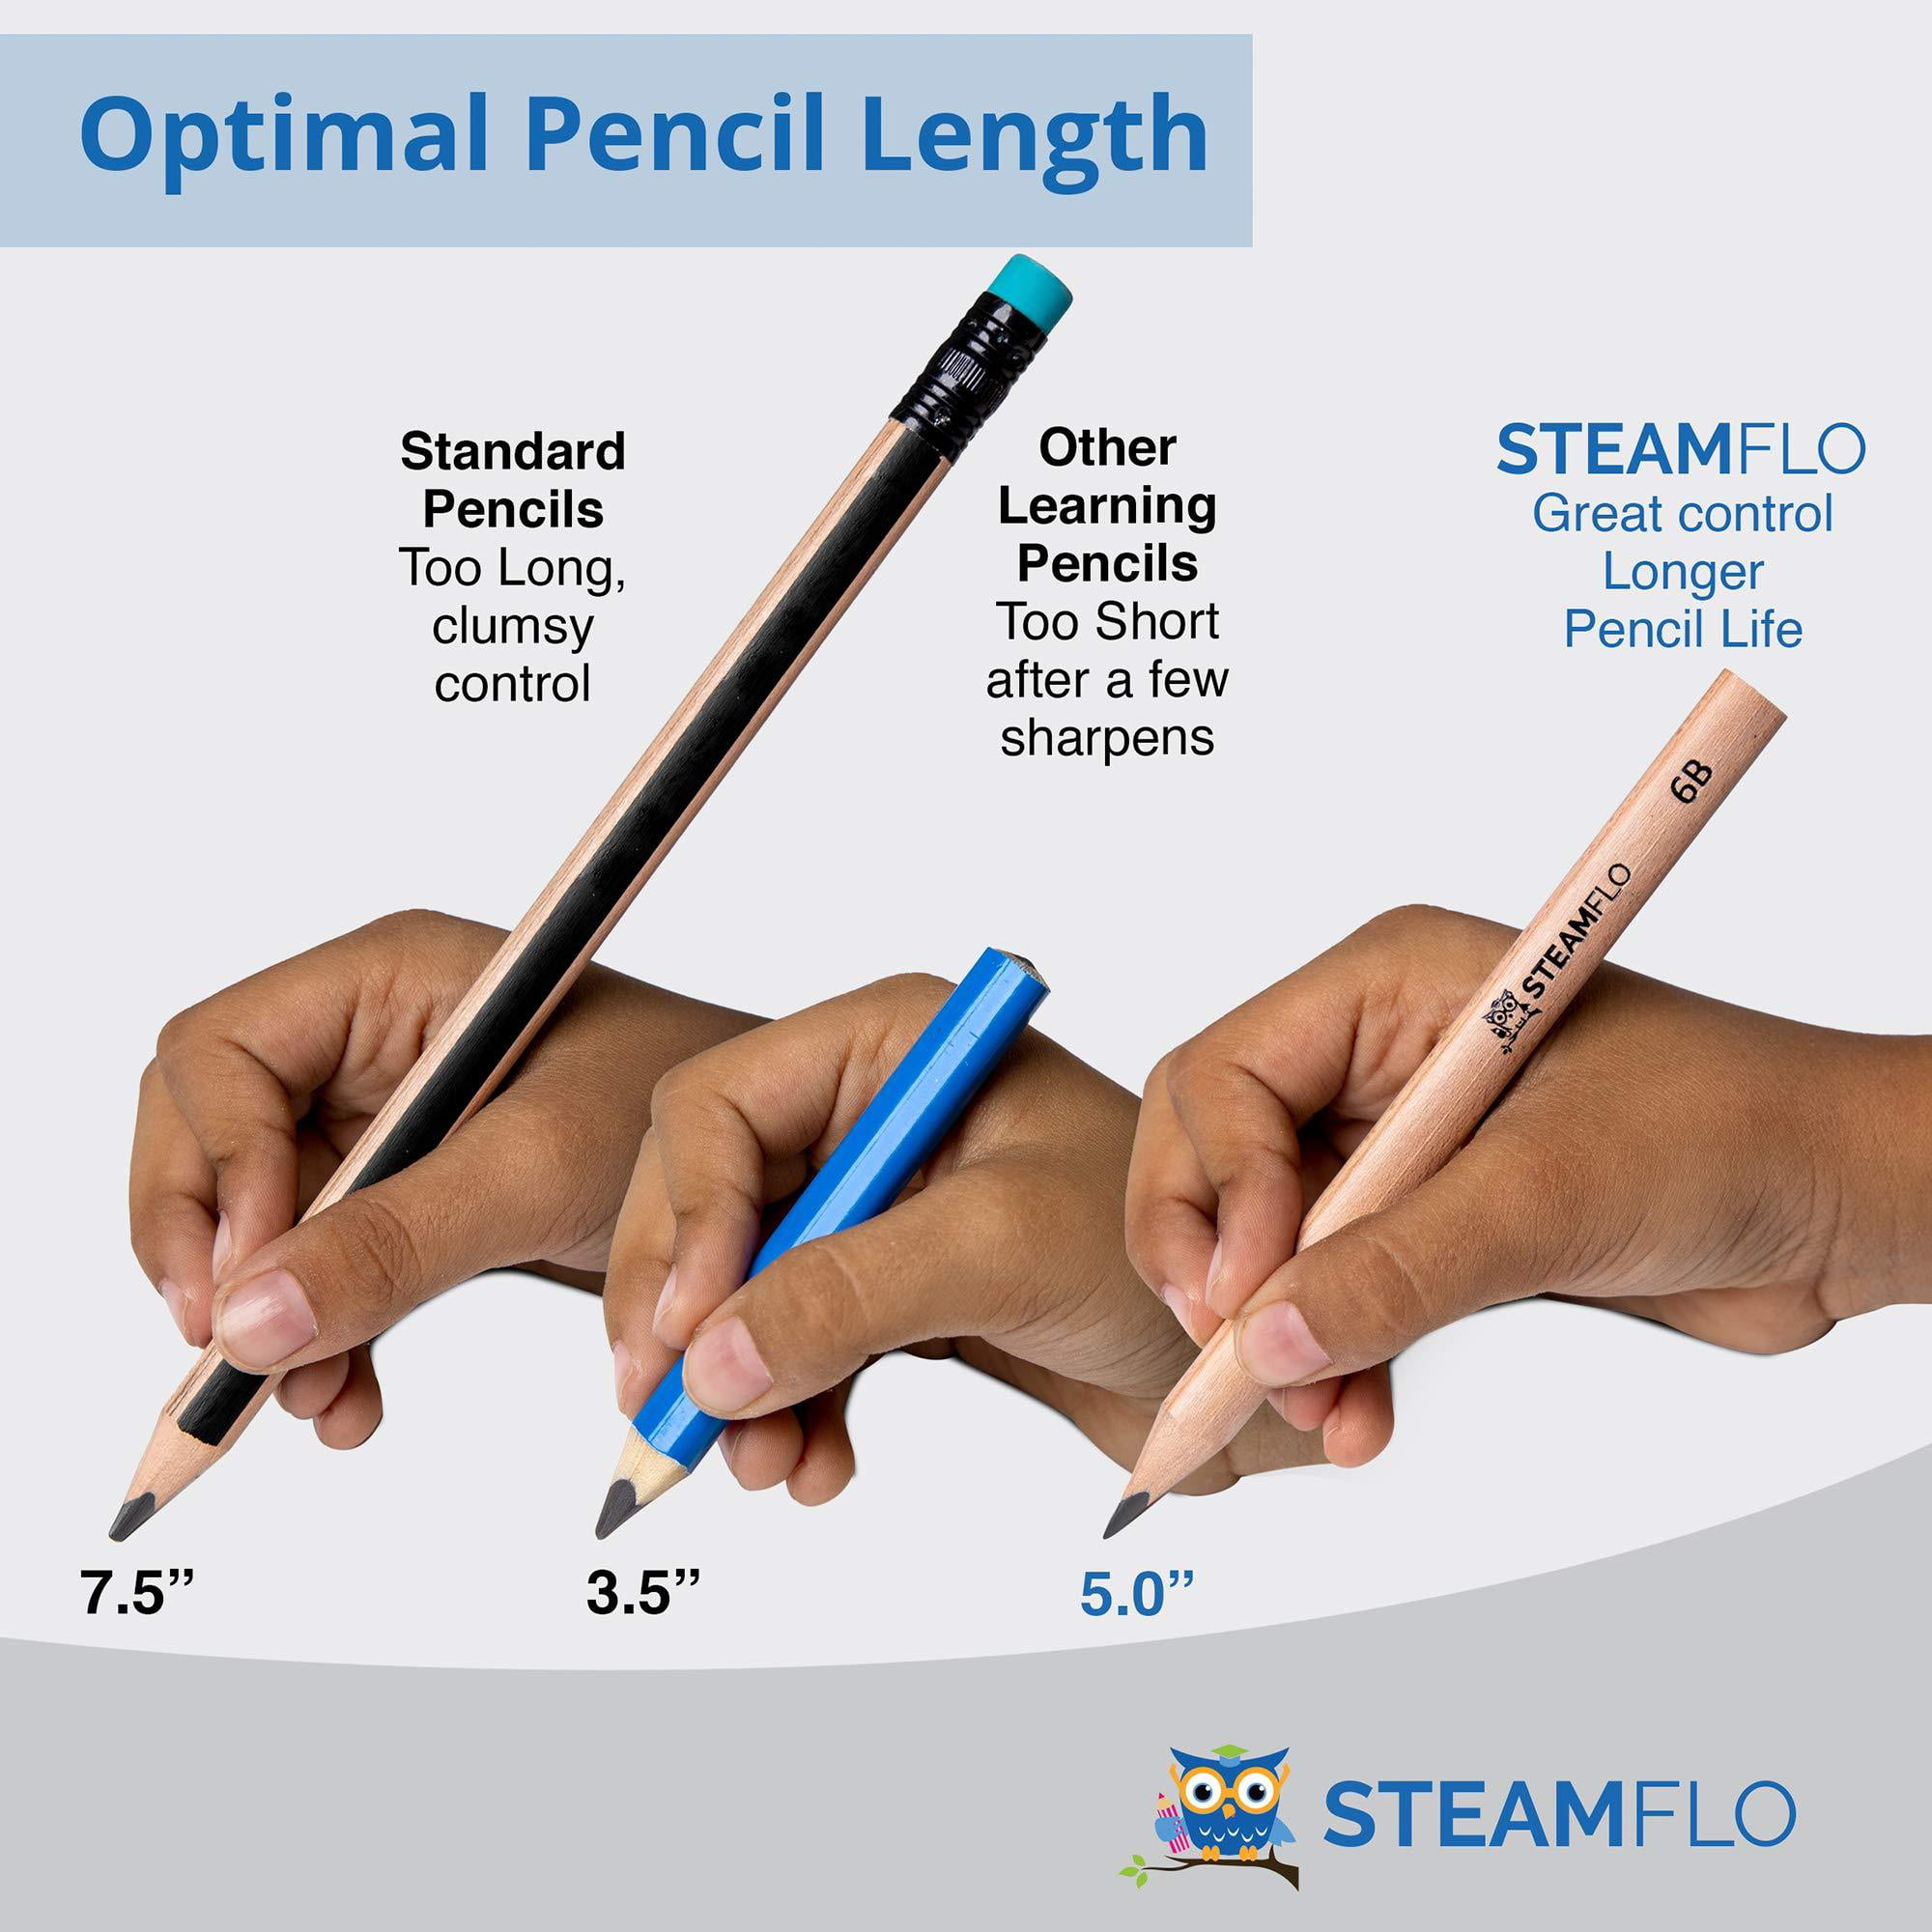 My First Learning Pencil – Jumbo Triangular Pencils Only